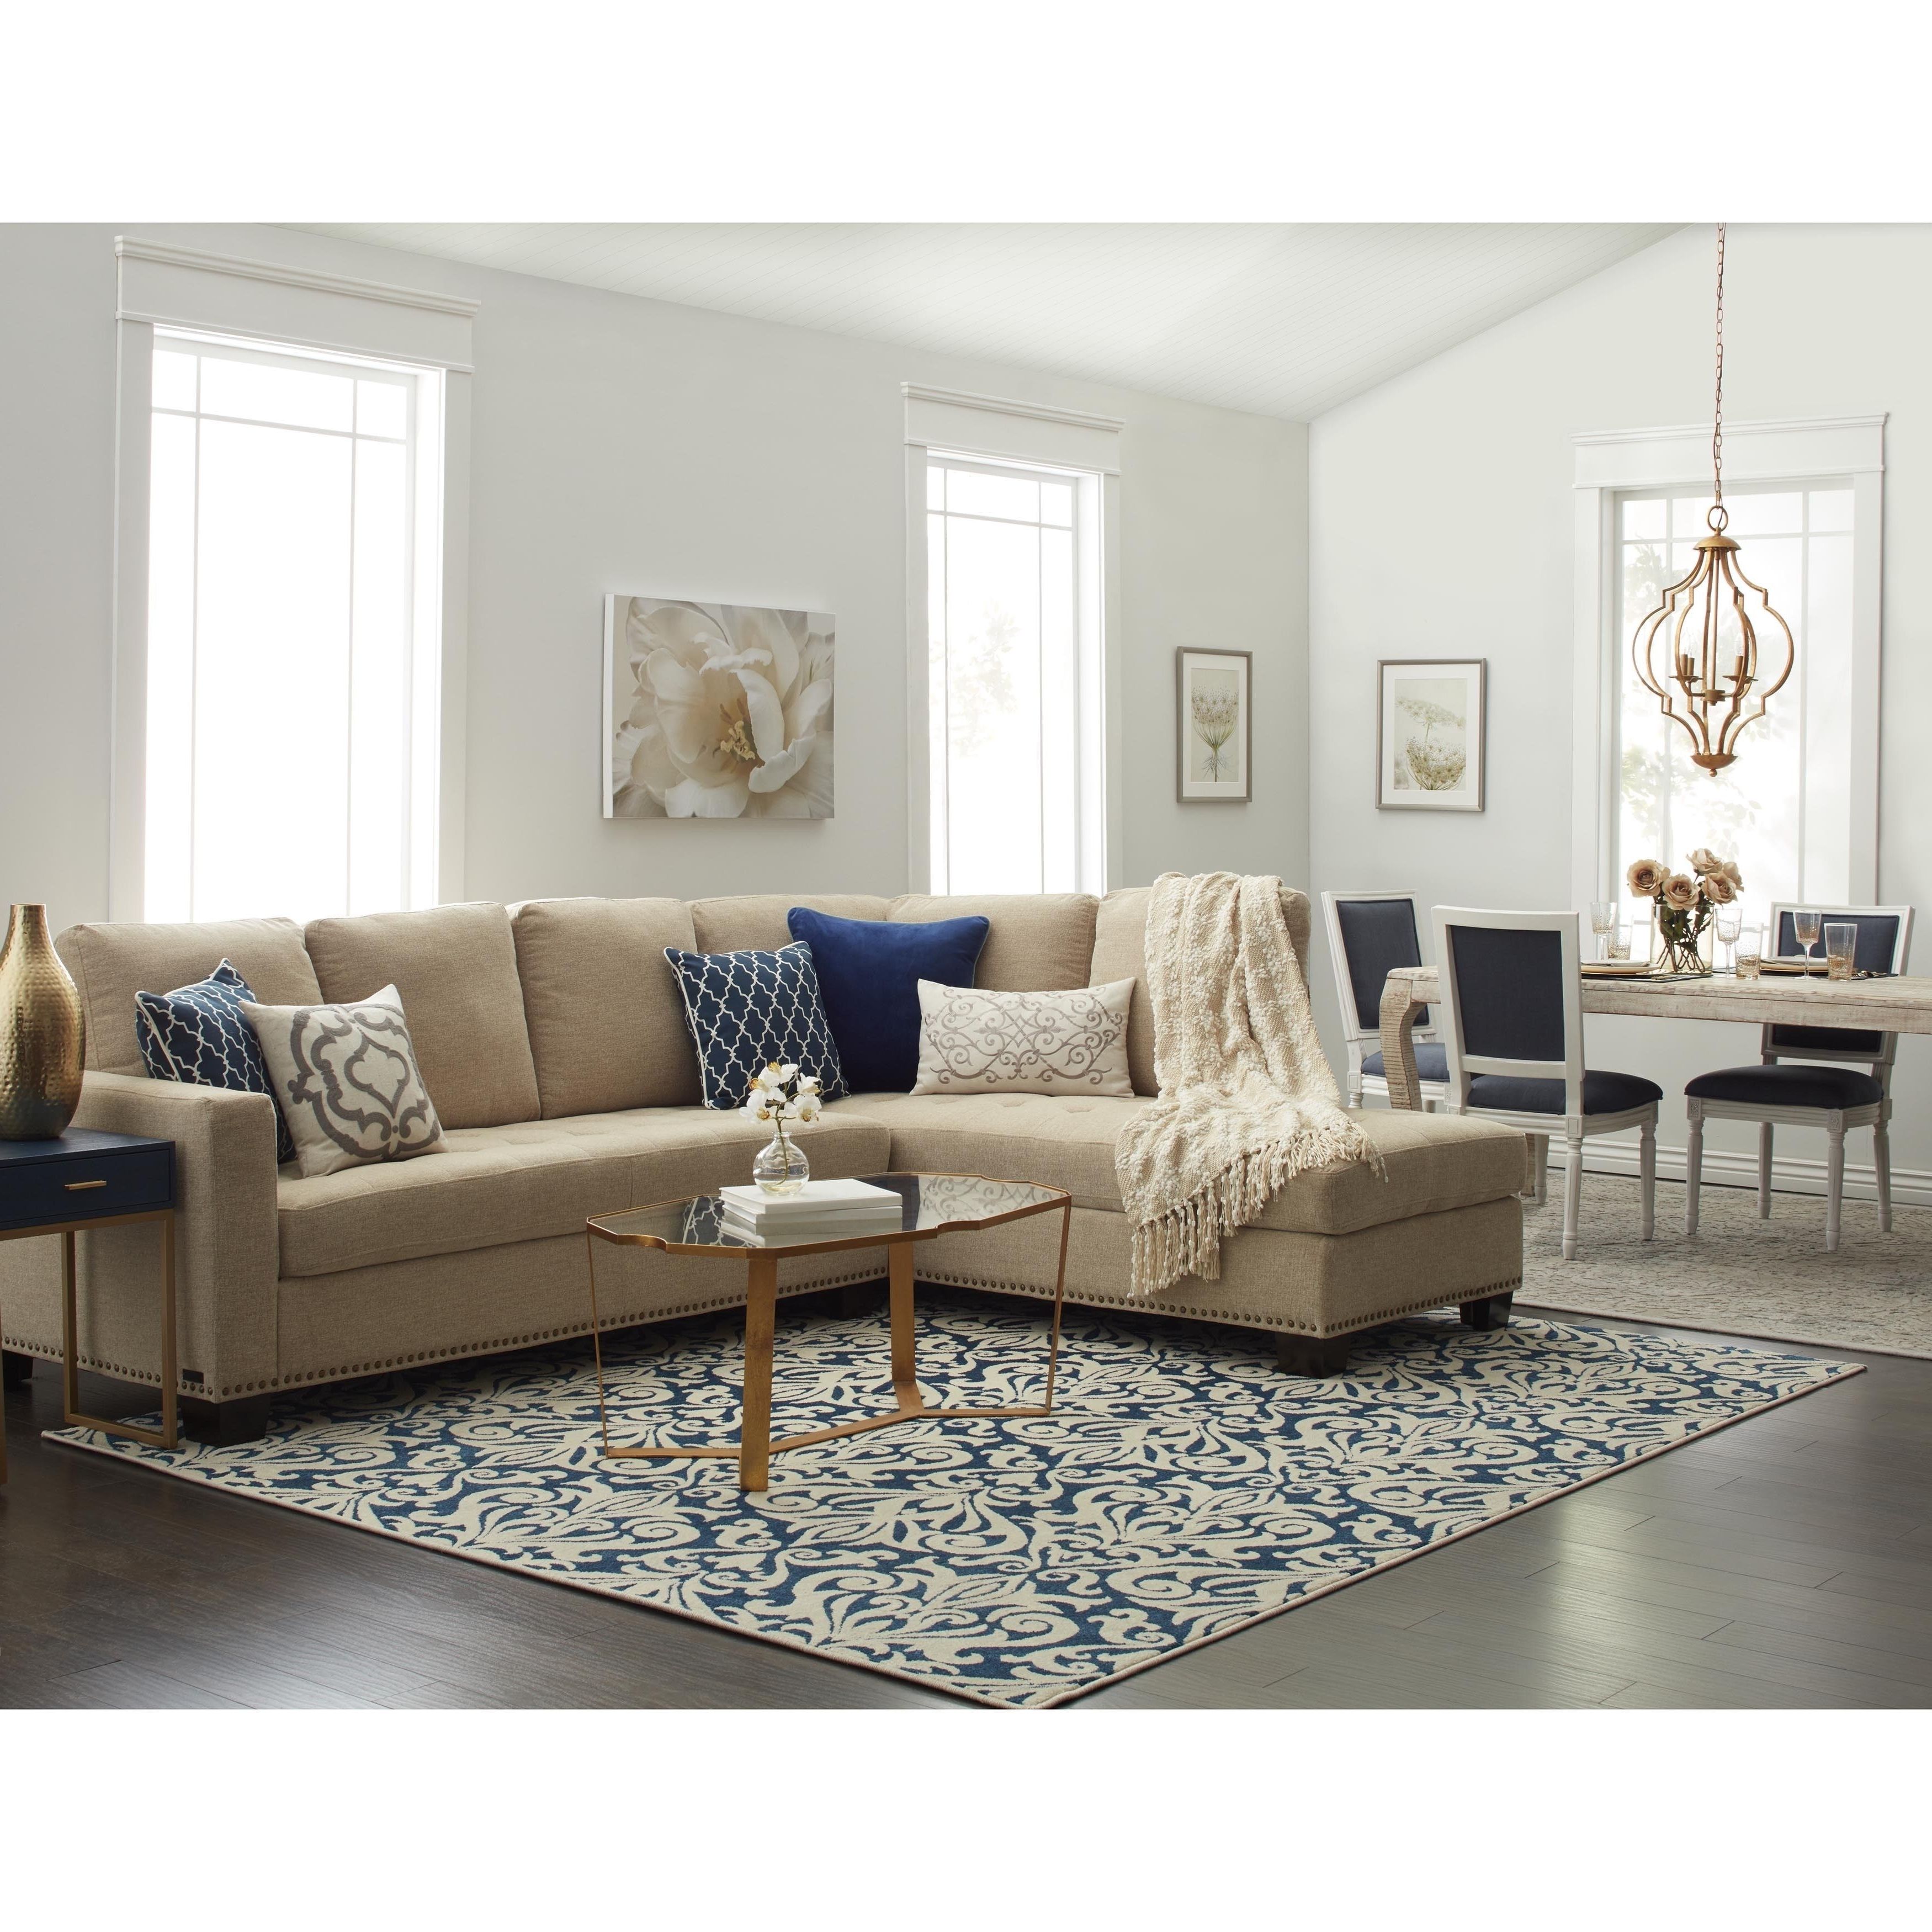 Well Liked Sectionals Home Goods : Free Shipping On Orders Over $45 At With Regard To Overstock Sectional Sofas (View 1 of 15)